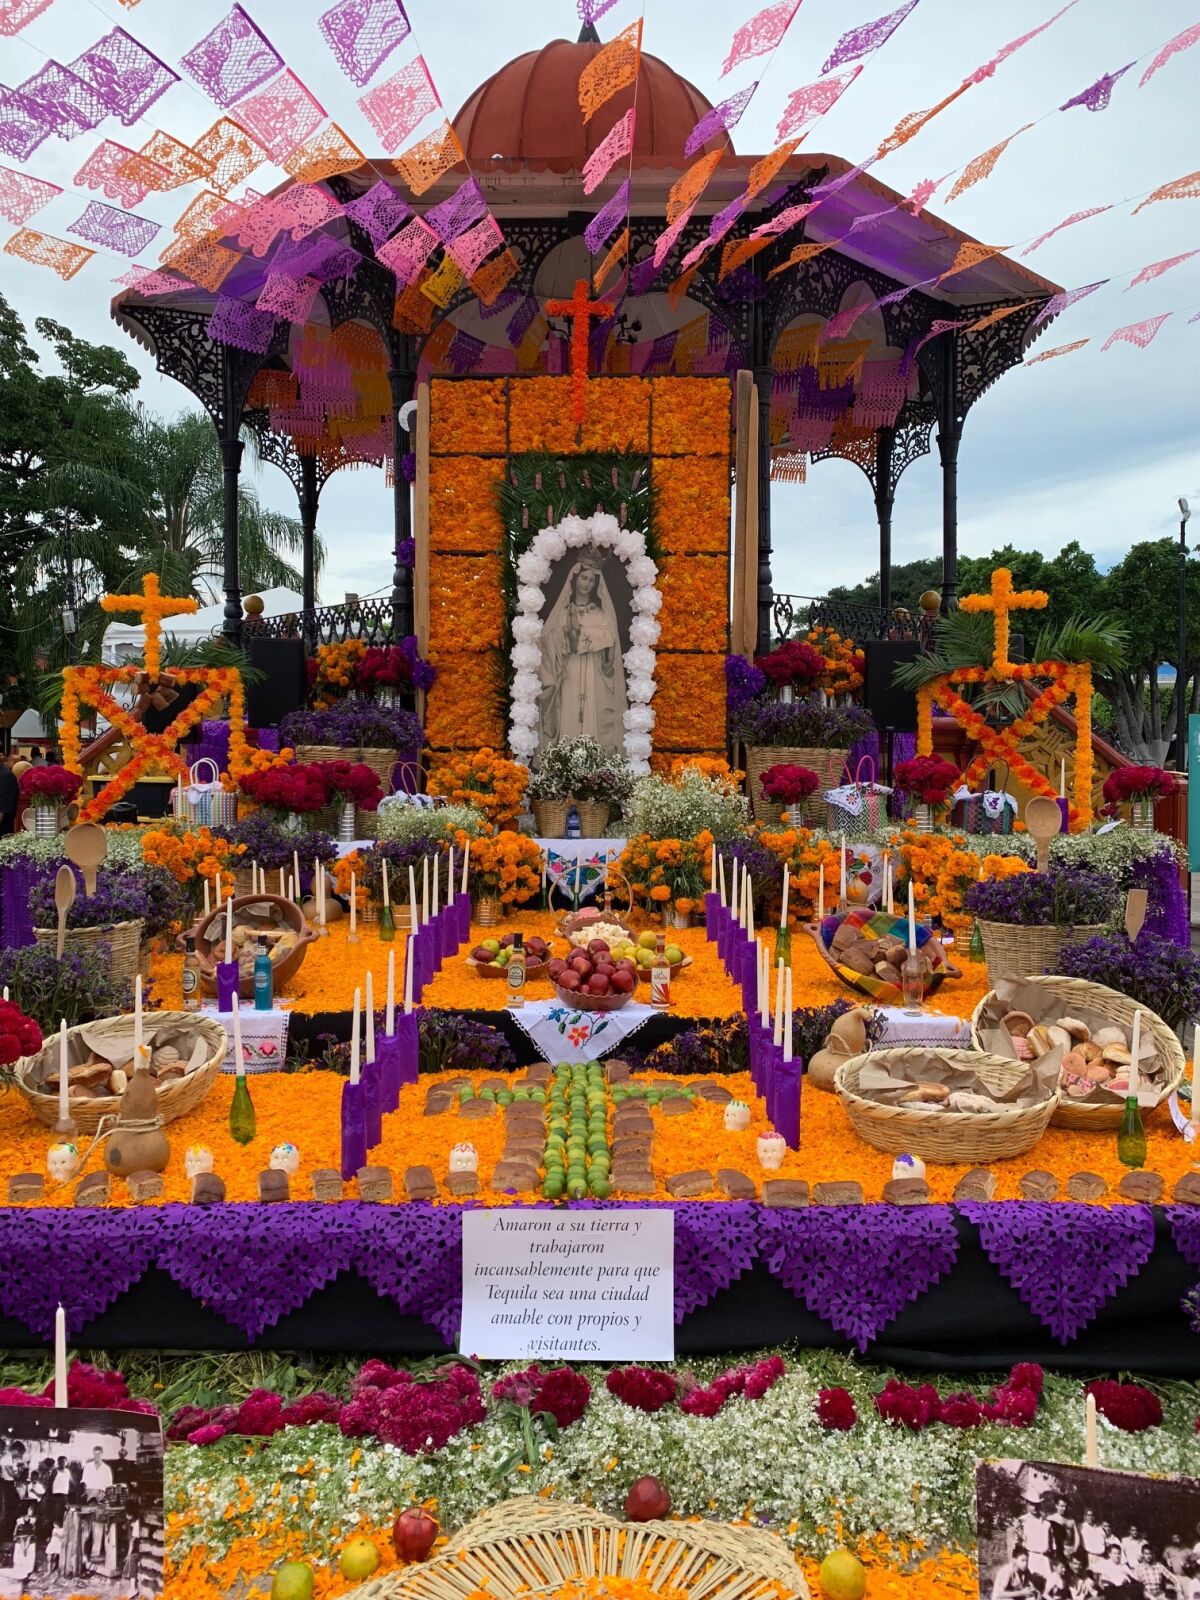 The Day of the Dead altar in Tequila's main plaza.